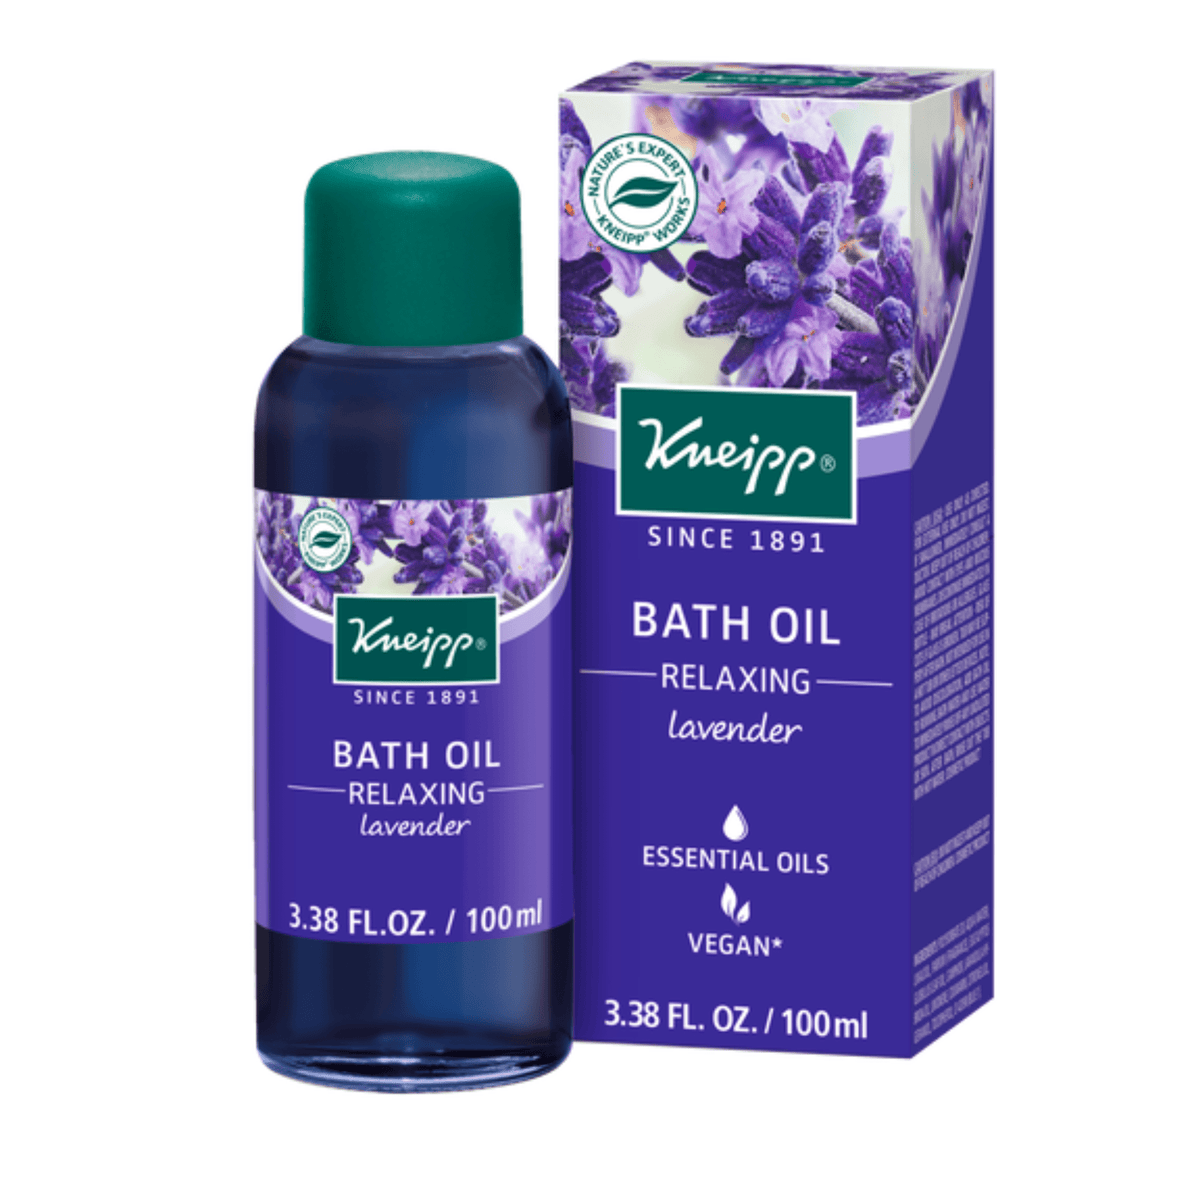 Primary Image of Lavender Relaxing Bath Oil